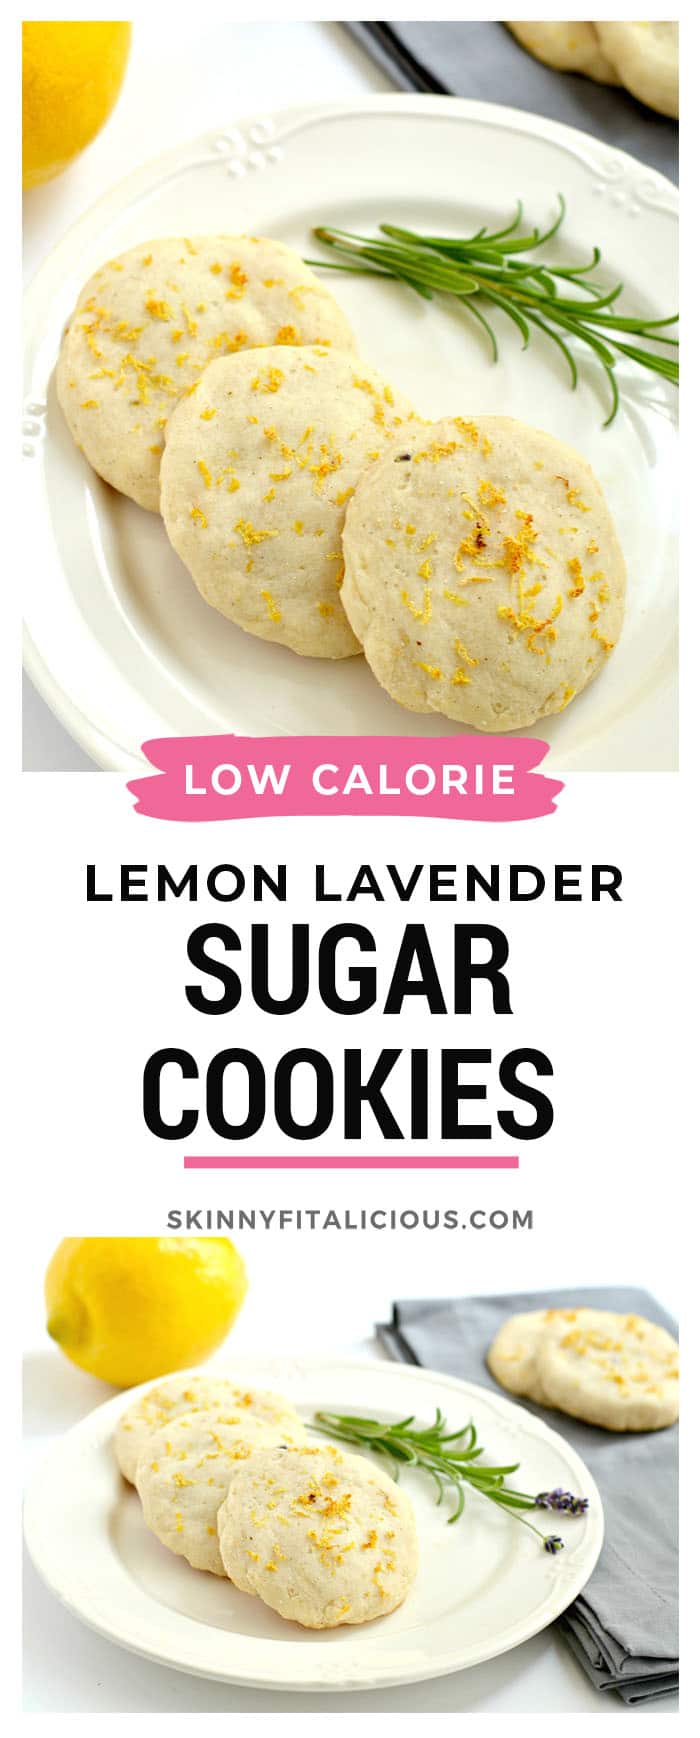 Healthy Lemon Lavender Cookies are perfect for warm weather! Packed with citrus, these Vegan, gluten free cookies are light, refreshing and subtly sweet. Gluten Free + Low Calorie + Vegan